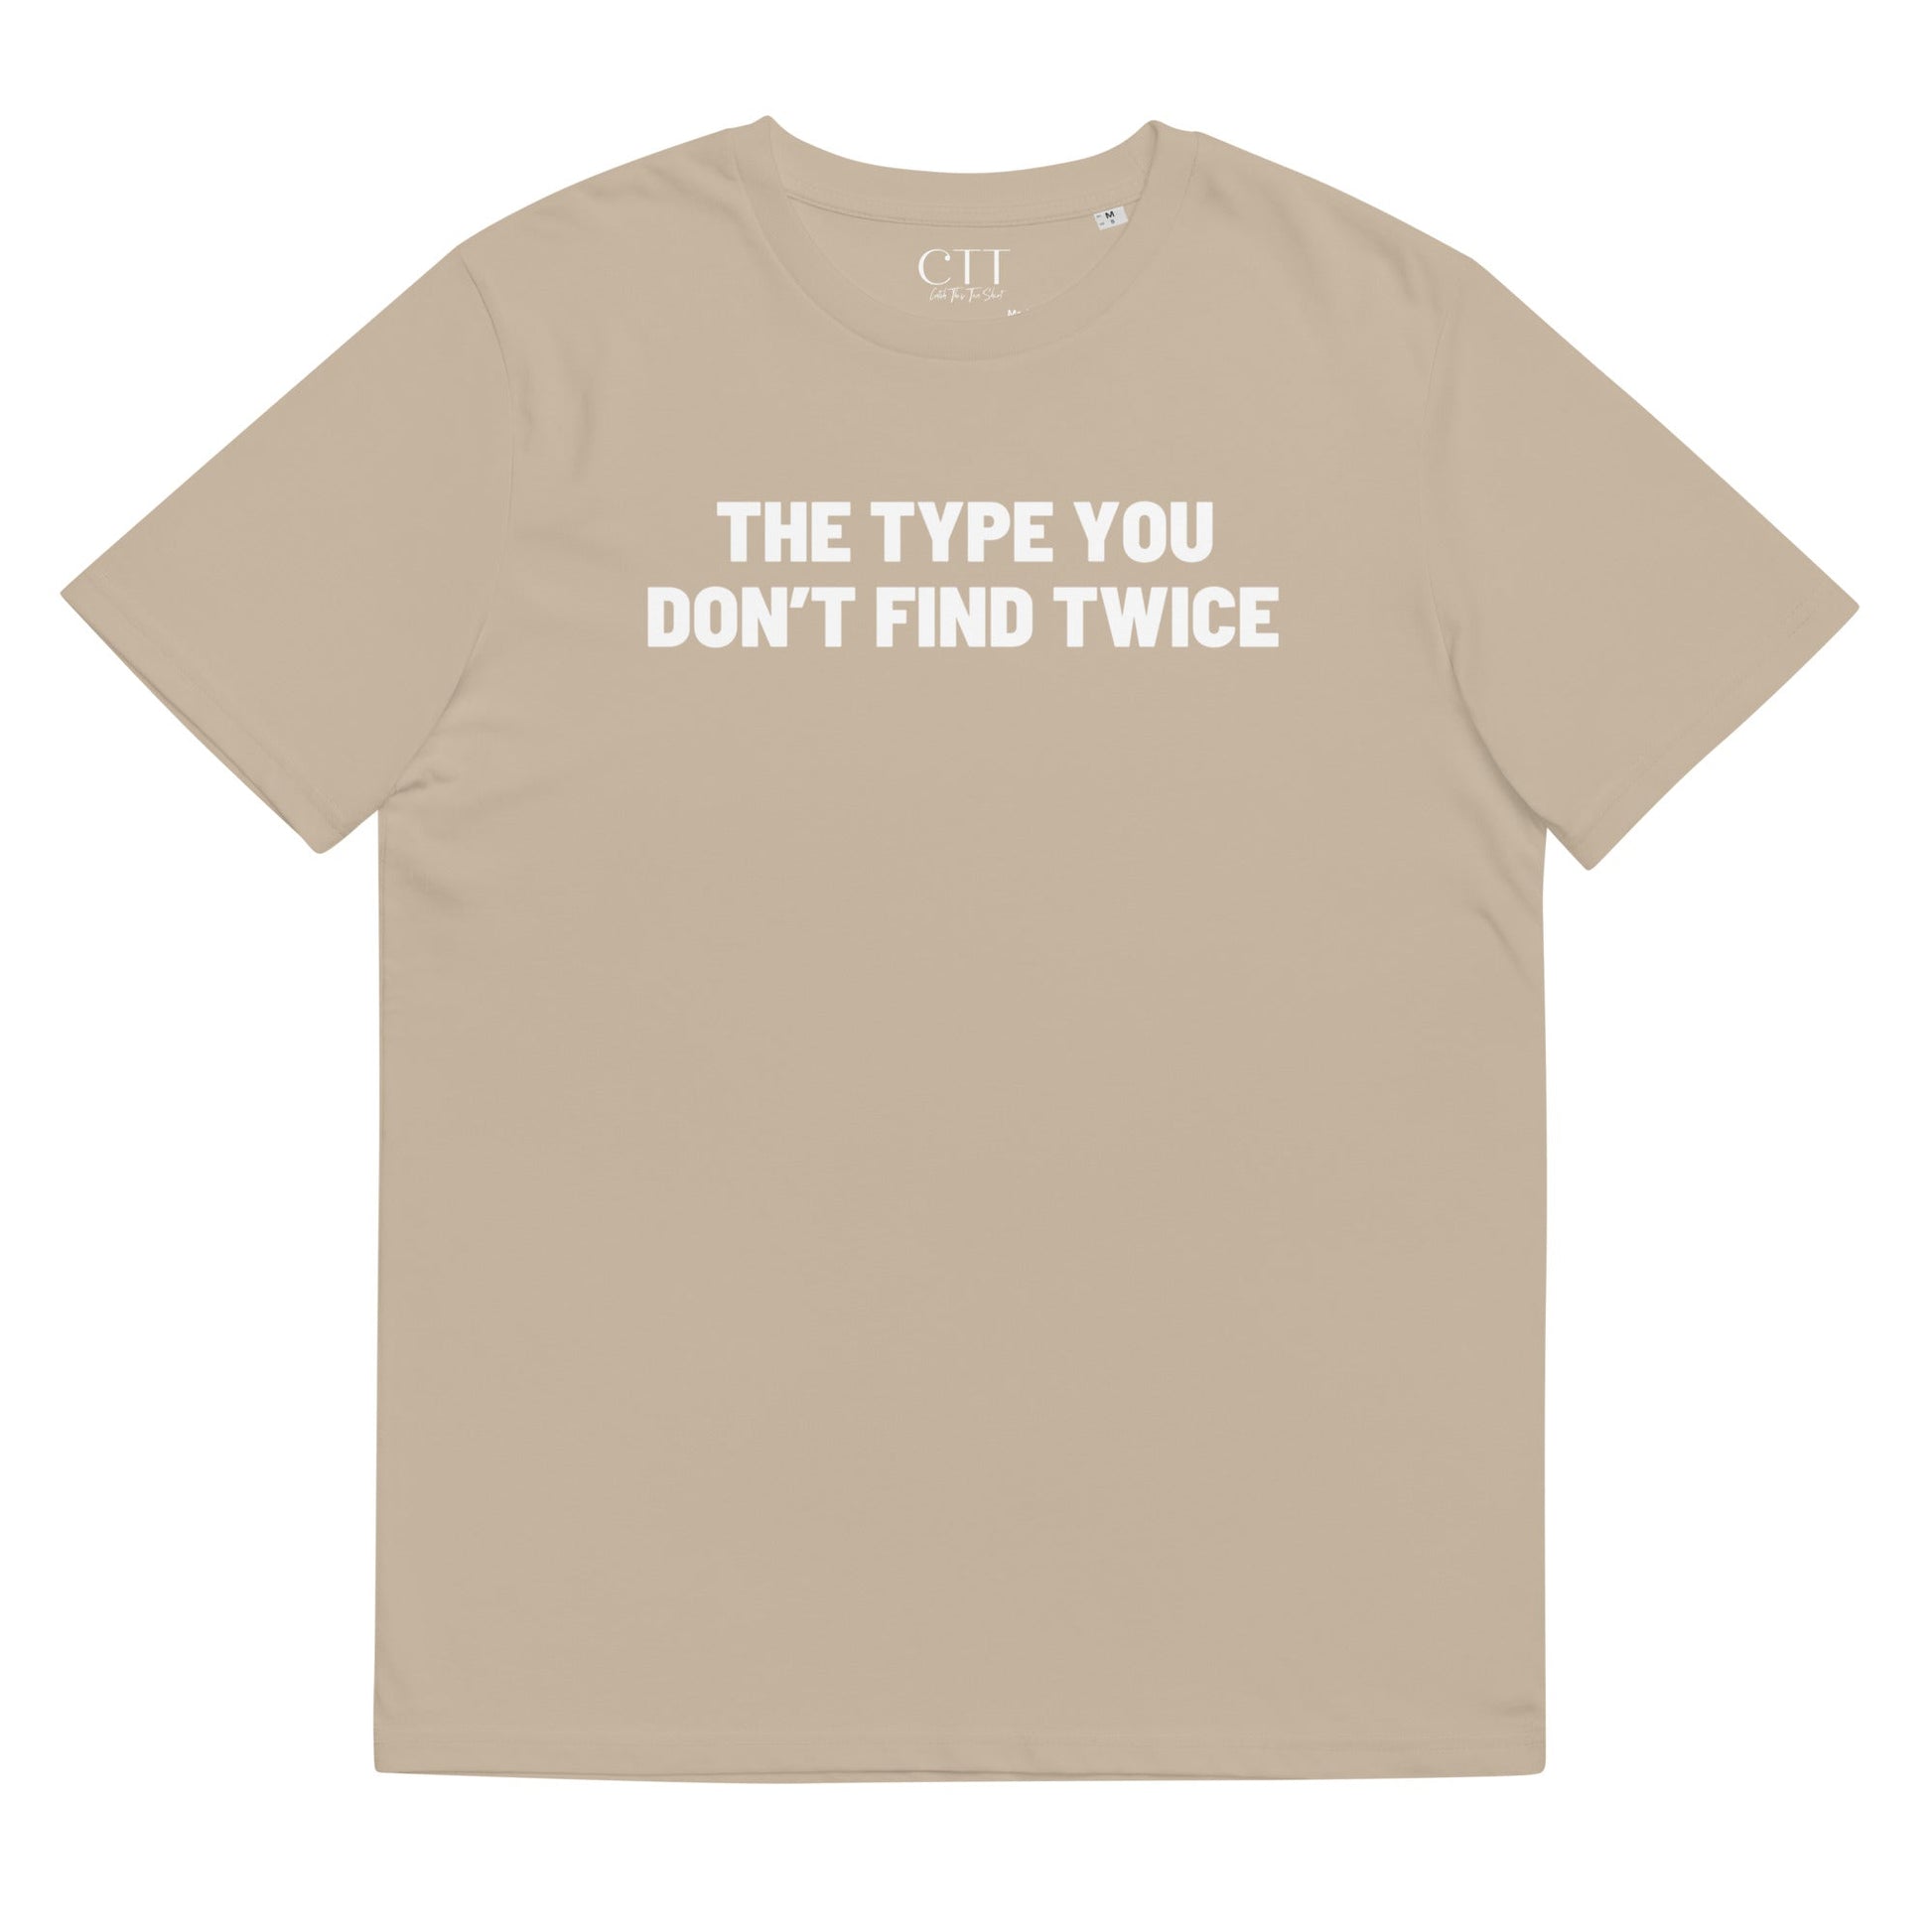 The Type You Don't Find Twice | Premium Soft Organic Cotton T-shirt | Unisex - Catch This Tea Shirt